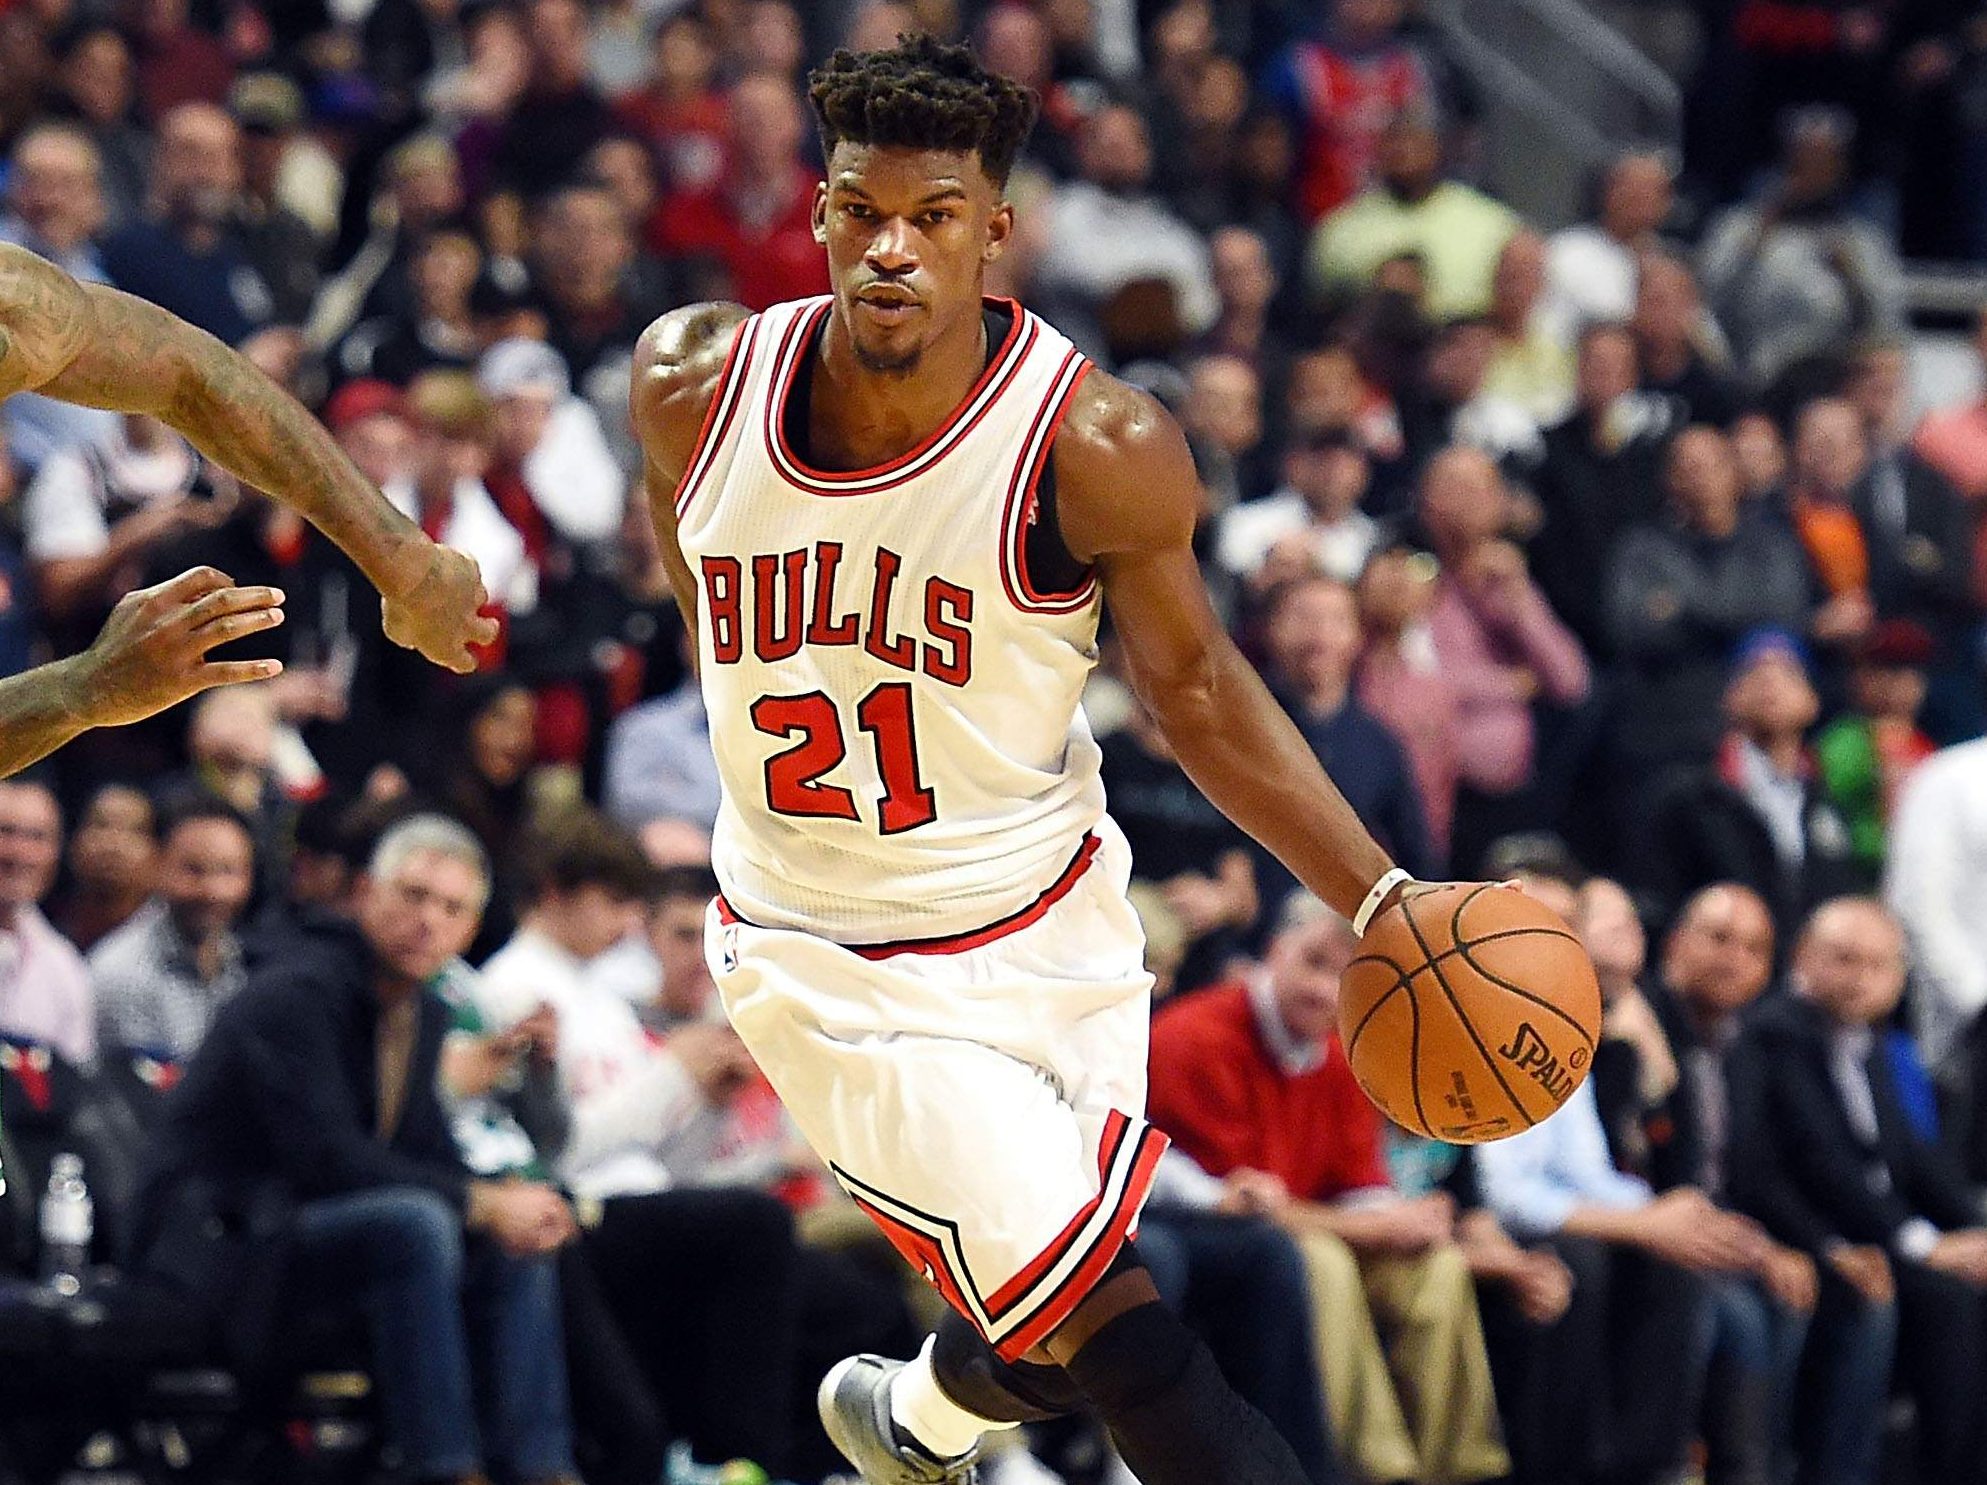 Bulls vs. Nets Live Stream How to Watch Online for Free